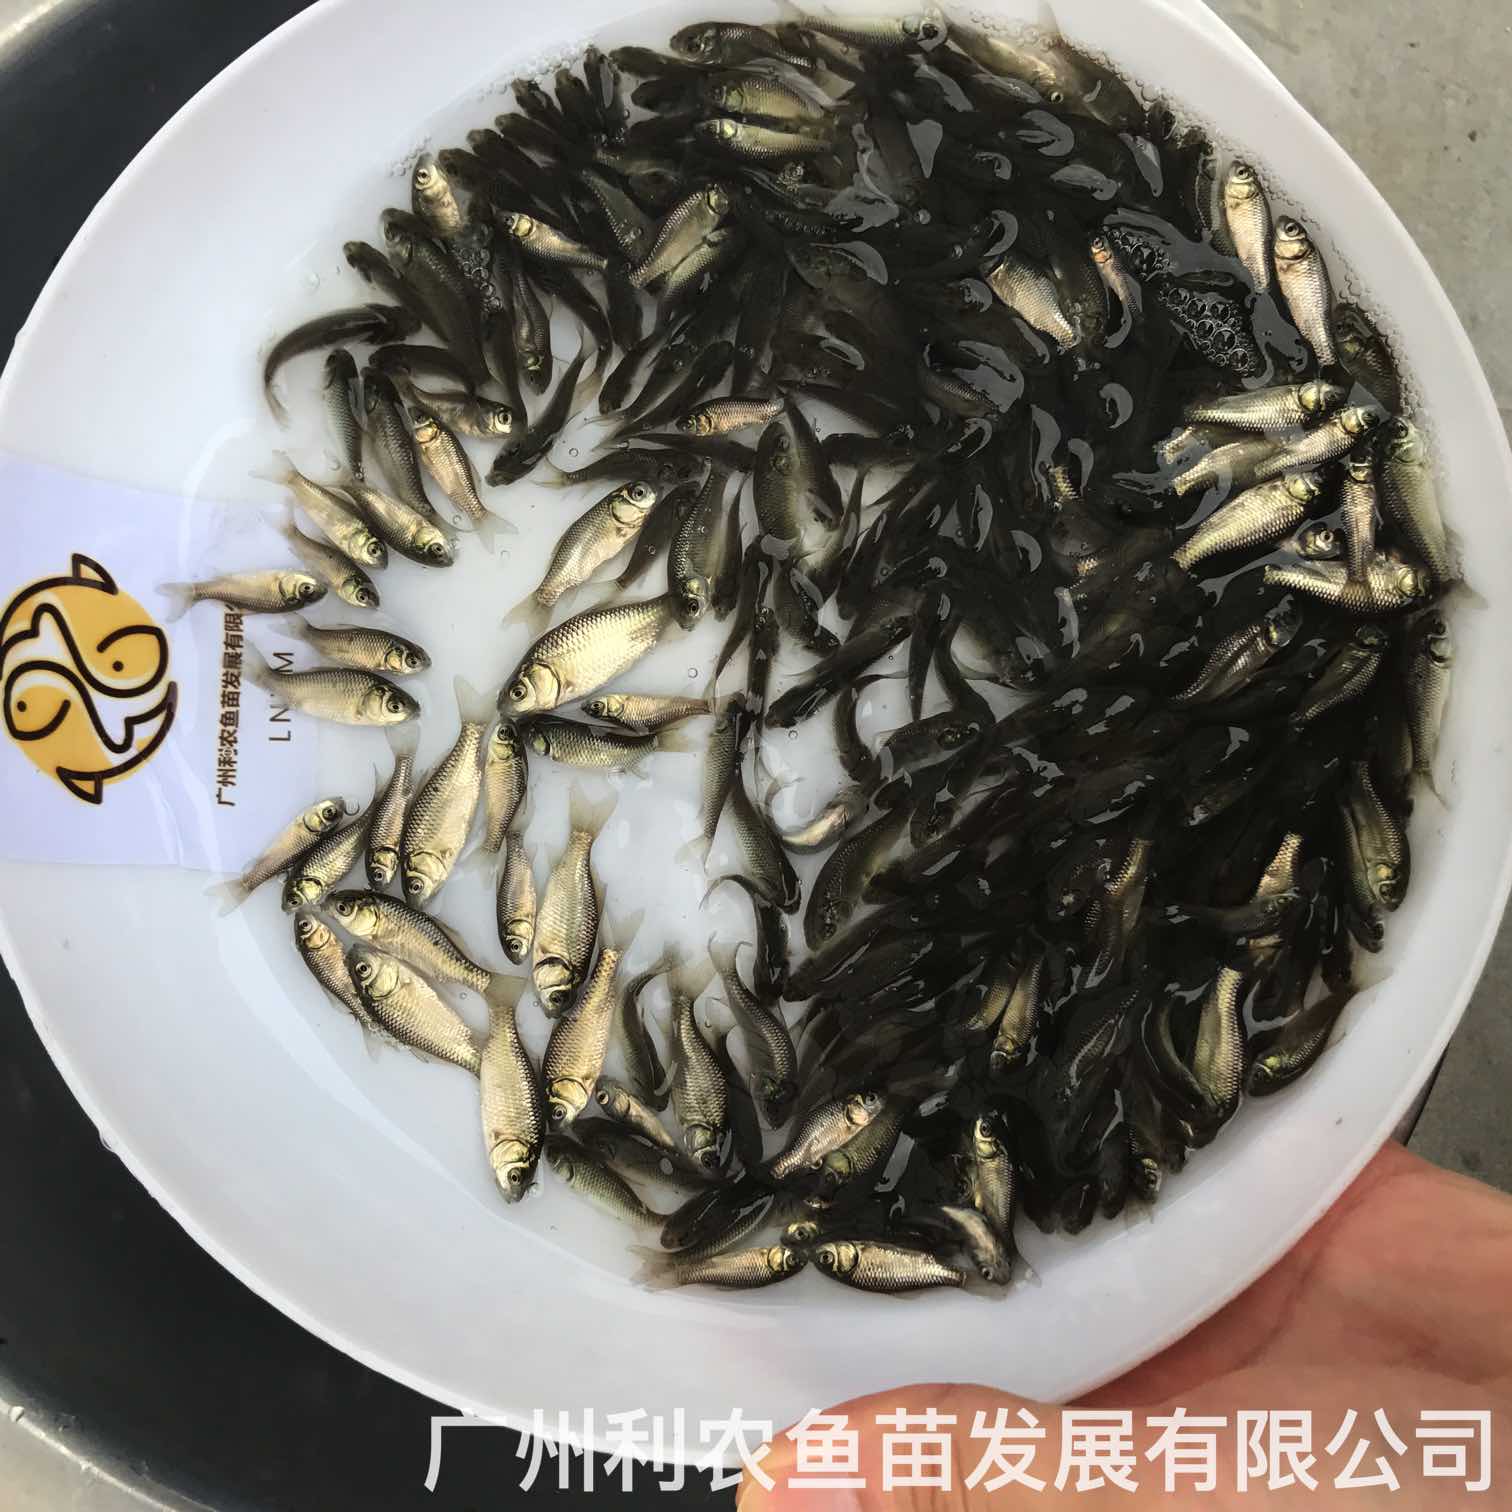 Wholesale of Zhongke No.5 and No.3 crucian carp fry can grow one kilogram in half a year, and can be shipped nationwide with cold resistance and fast growth